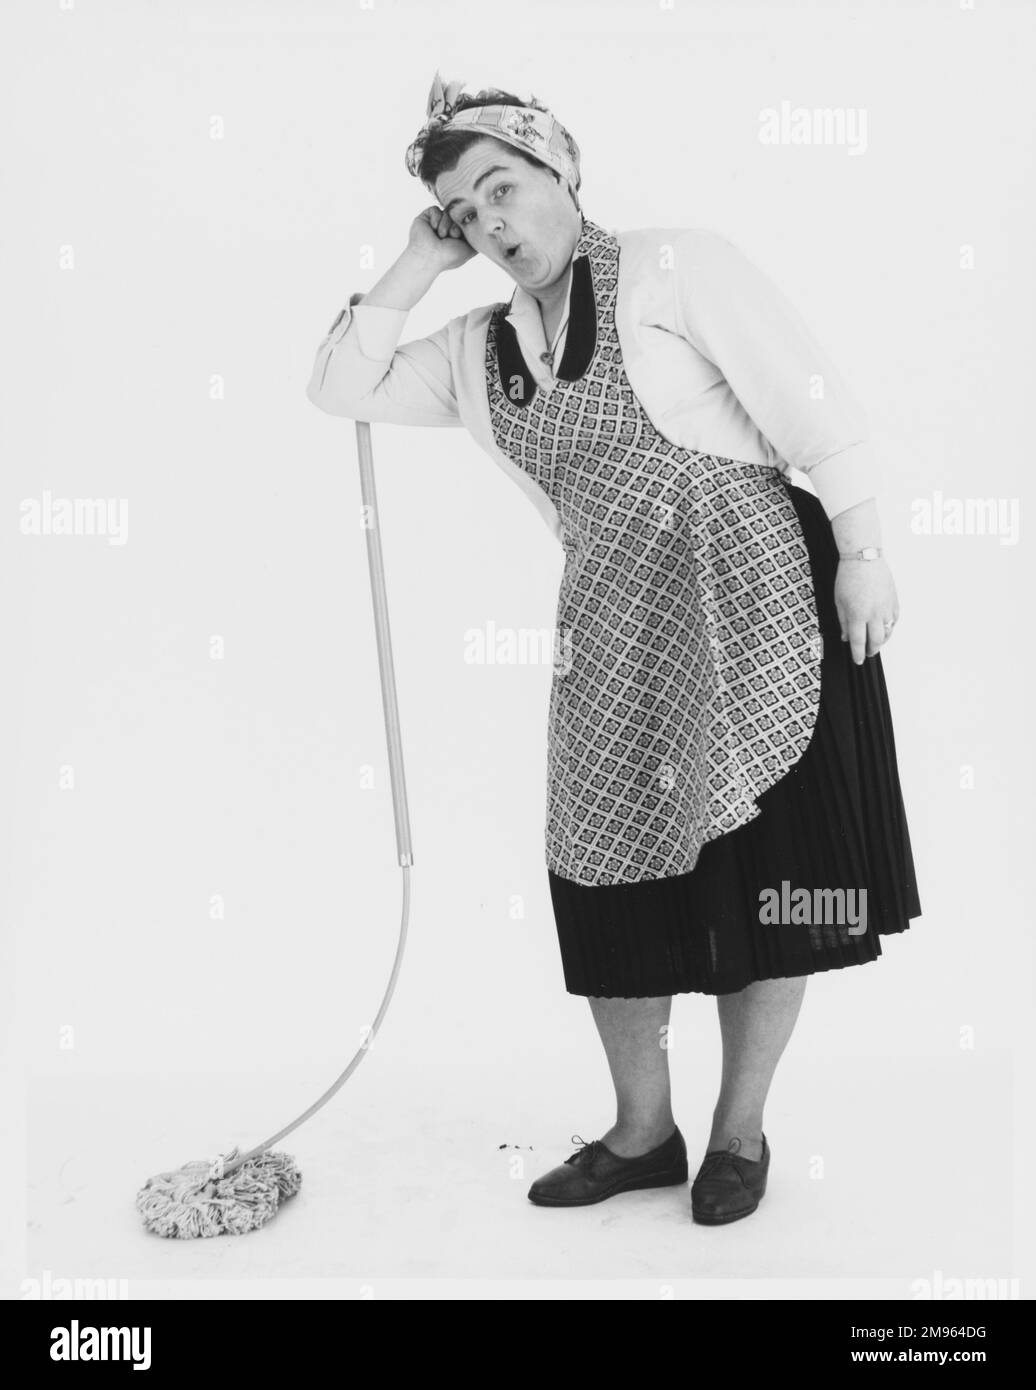 A stereotypical cleaner leaning on her mop. Stock Photo